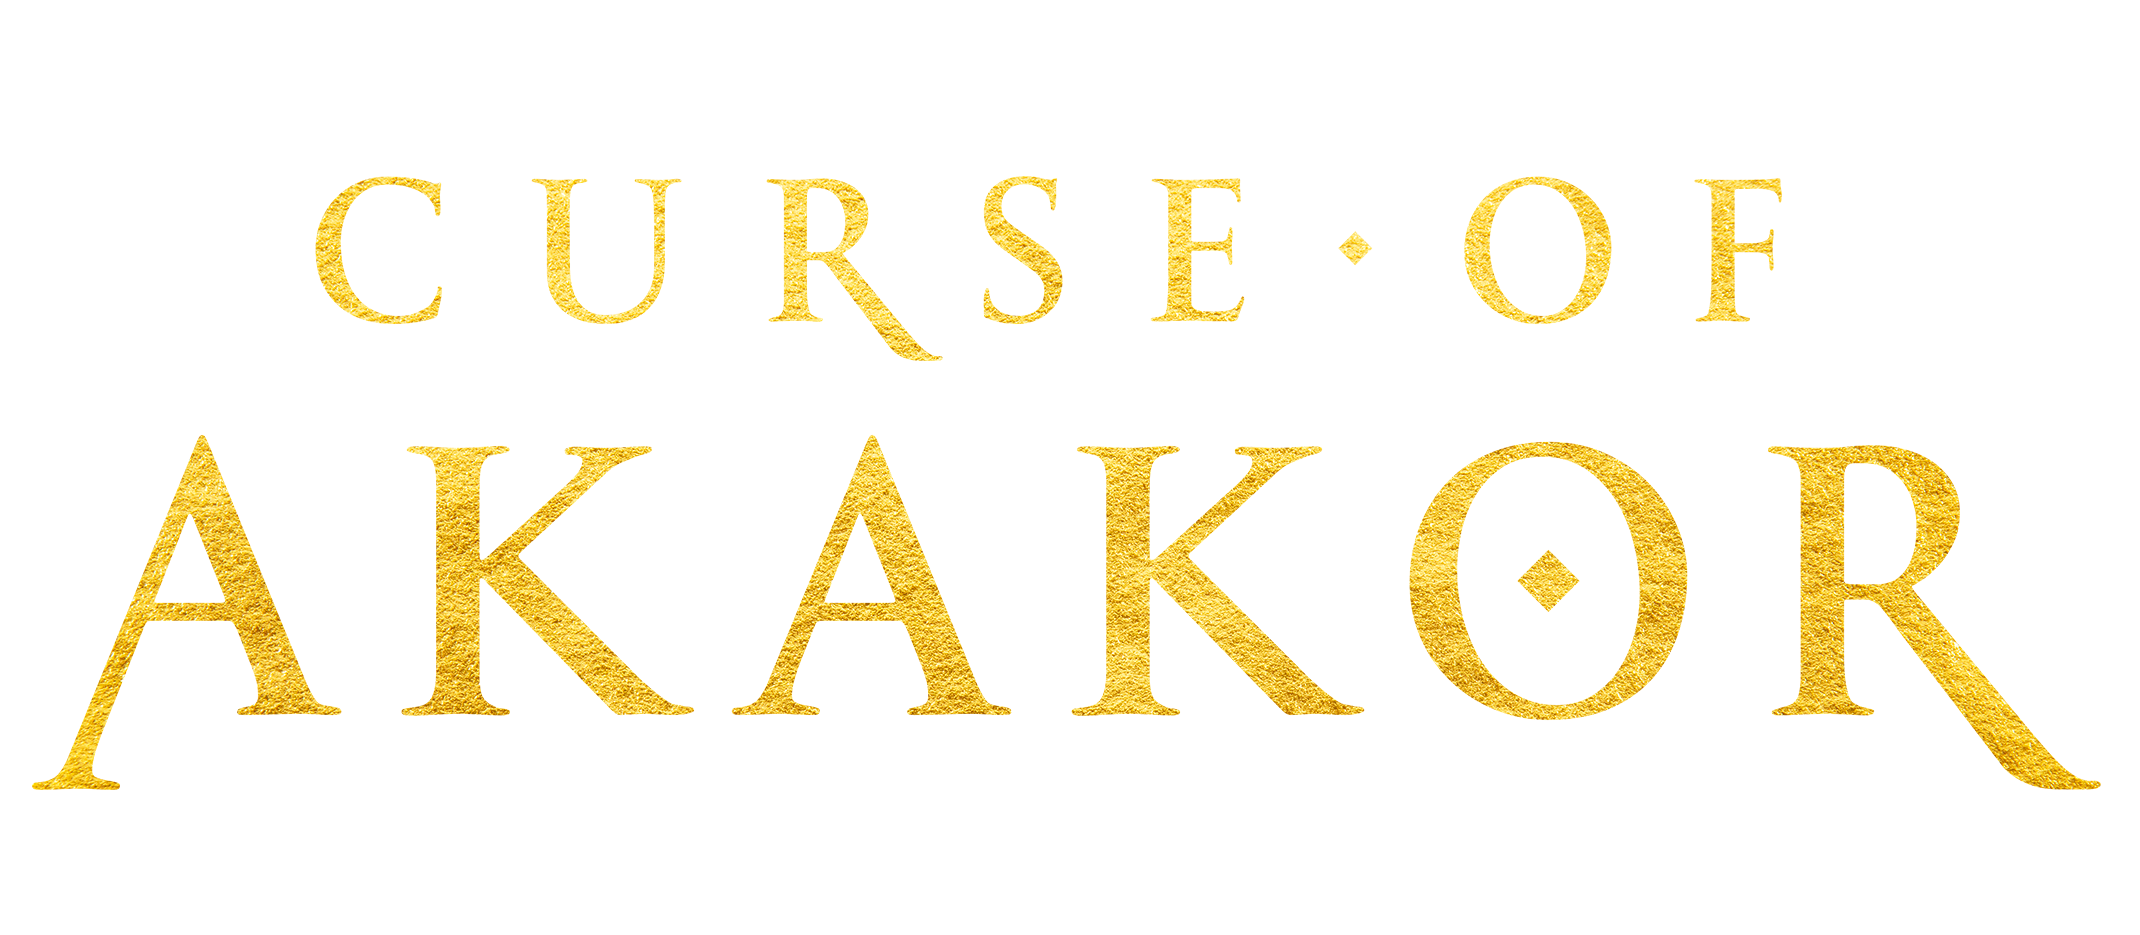 The Brand New Series, Curse of Akakor, airs Wednesdays on Discovery